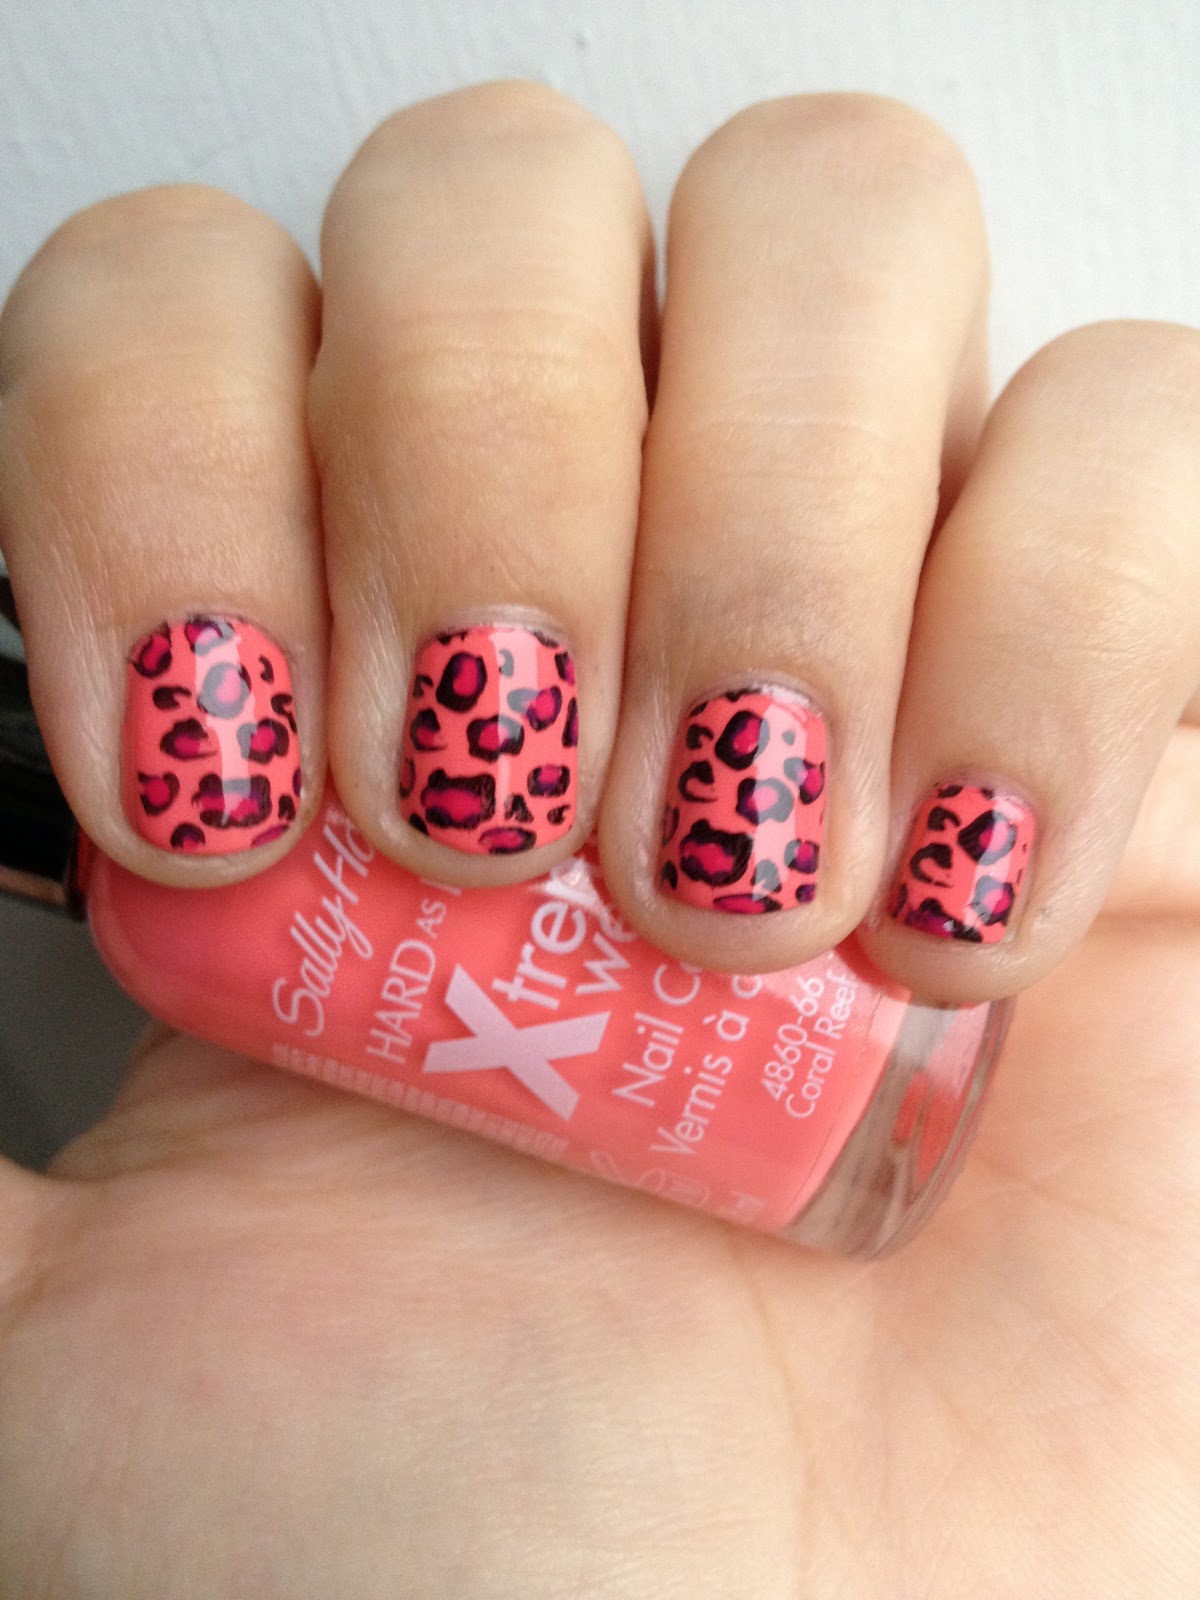 Miscellaneous Manicures: Pink Monday: Cheetah for Breast Cancer